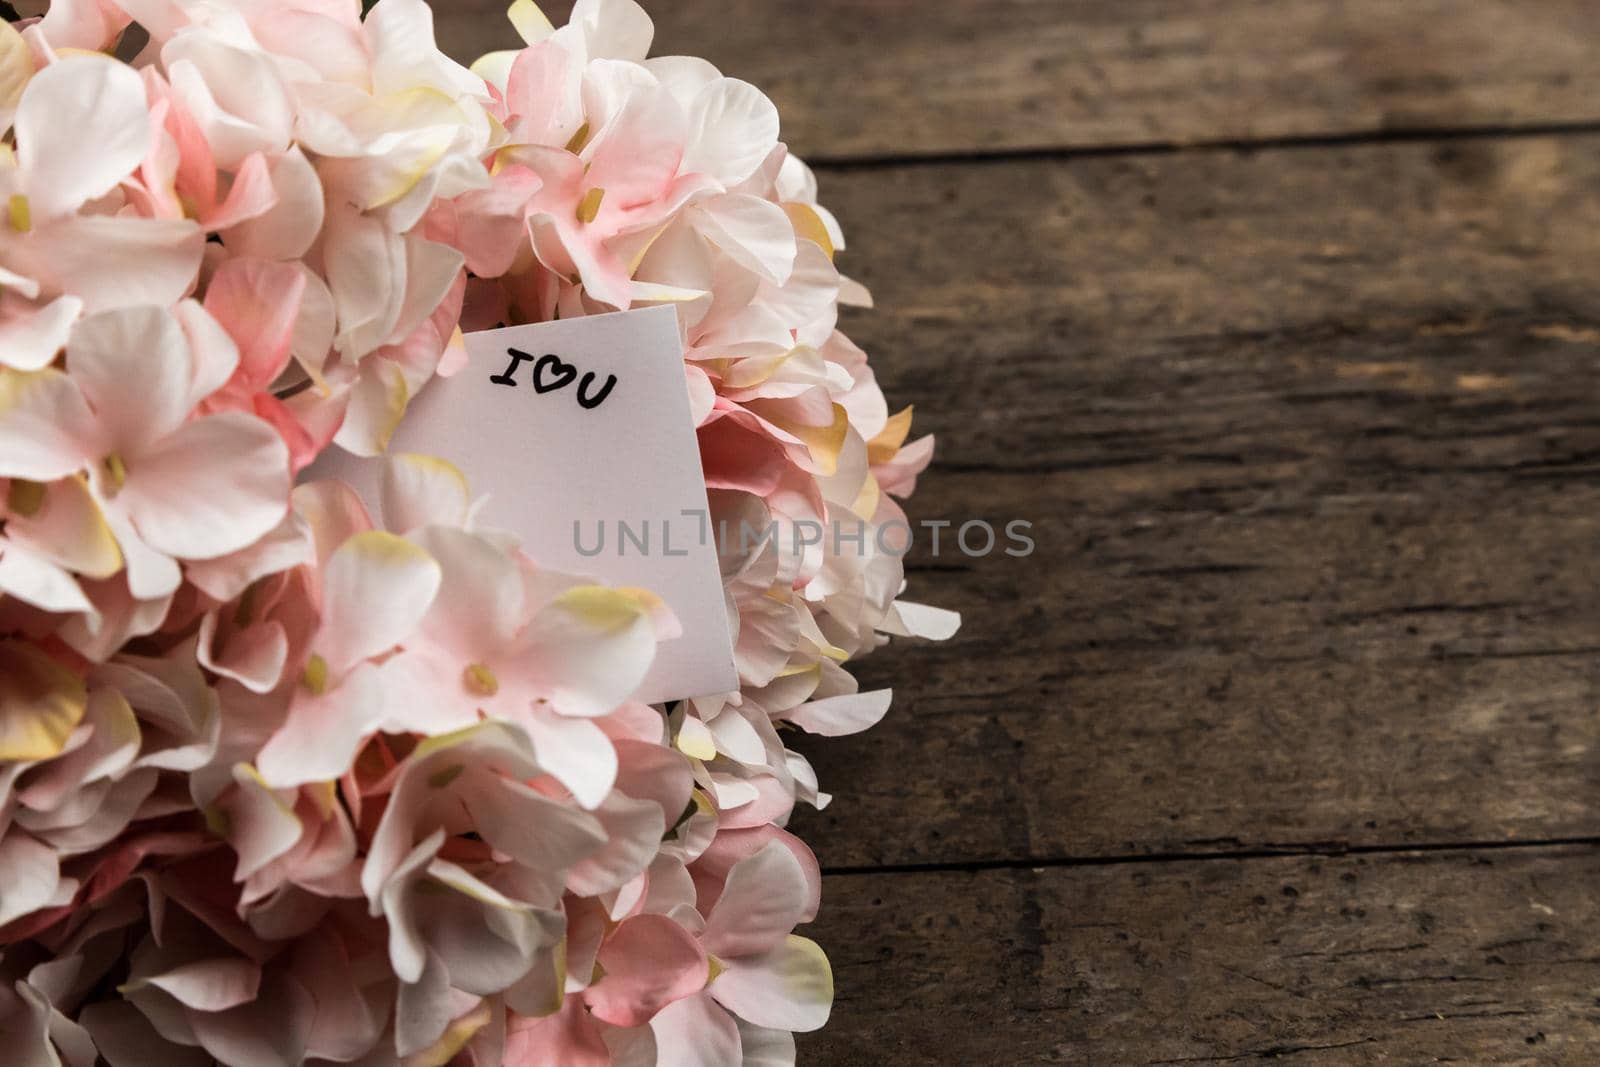 Pastel pink hydrangea flowers and a piece of paper on wood background. Copy space for text.